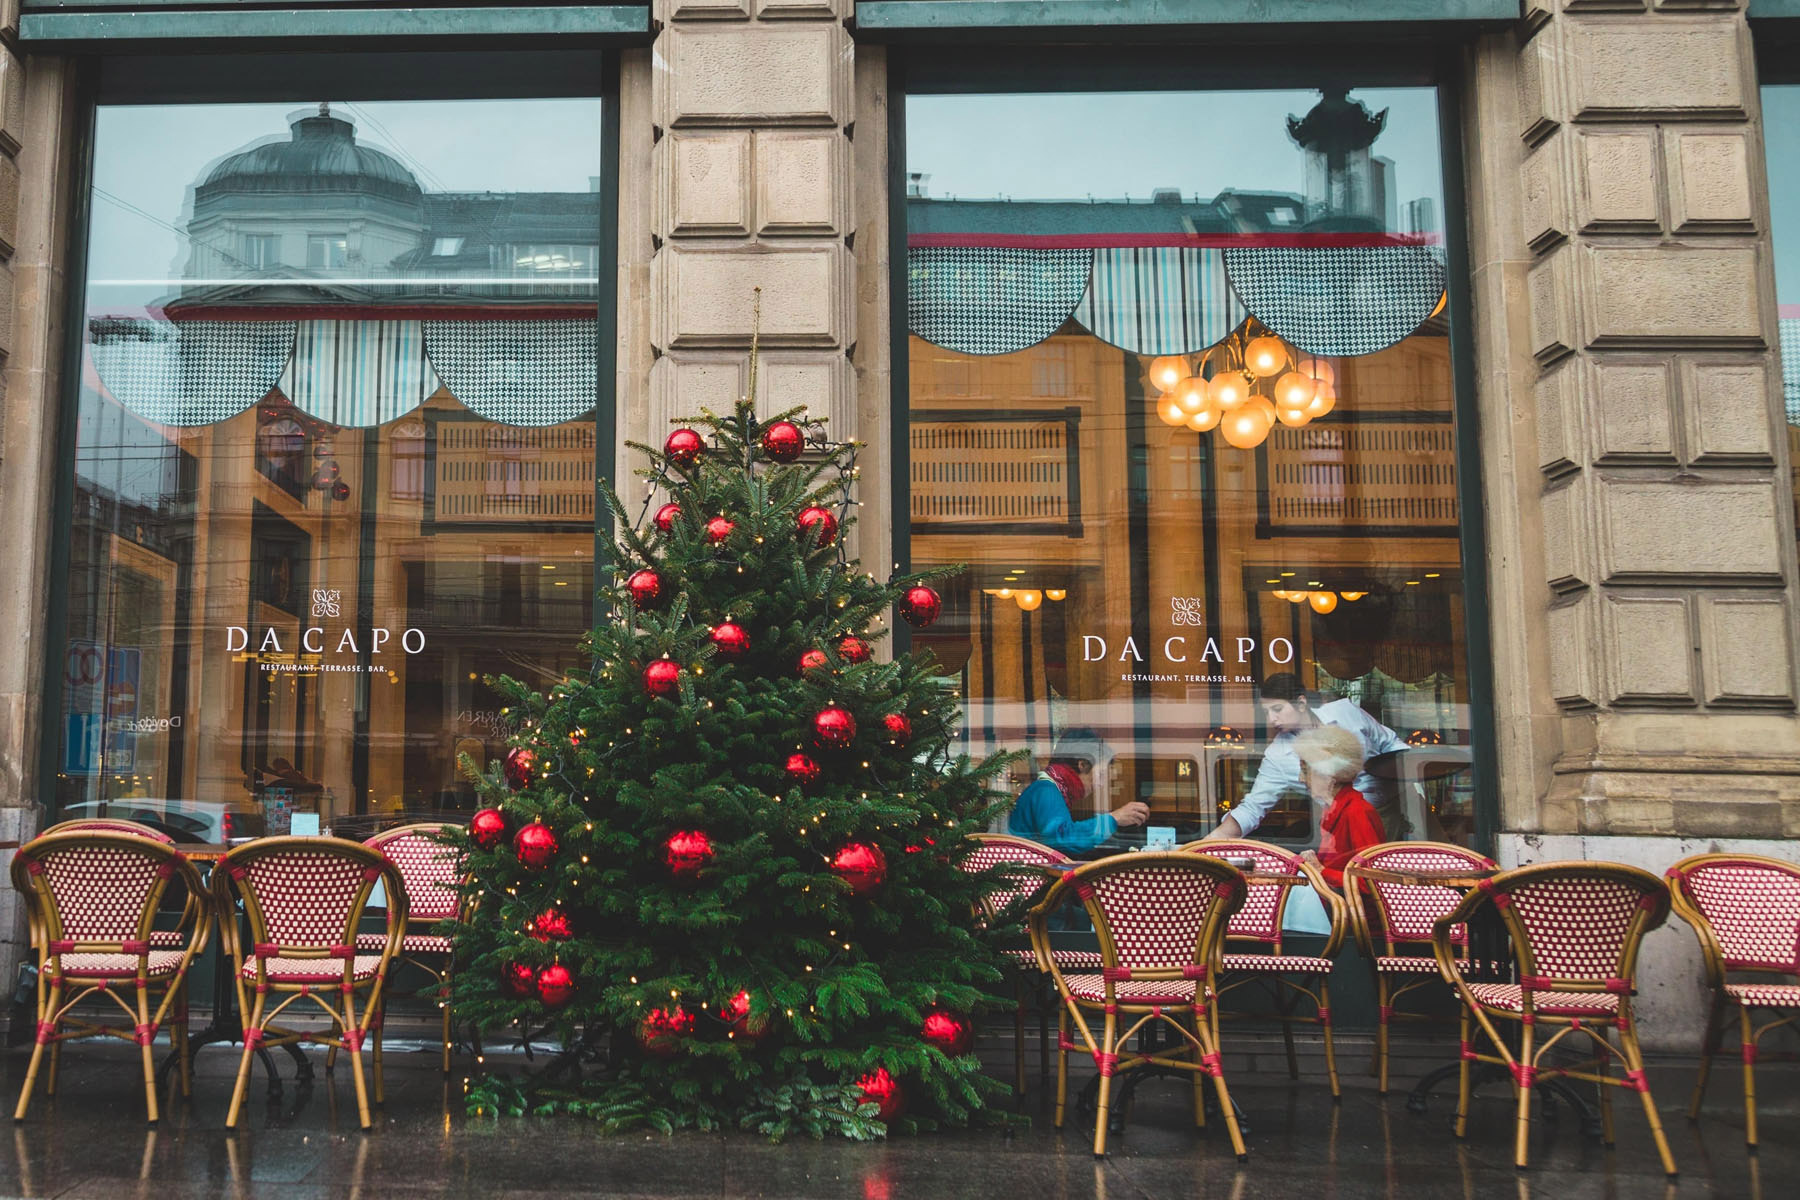 A Christmas like no other: How to prepare your restaurant for 2020 festive season